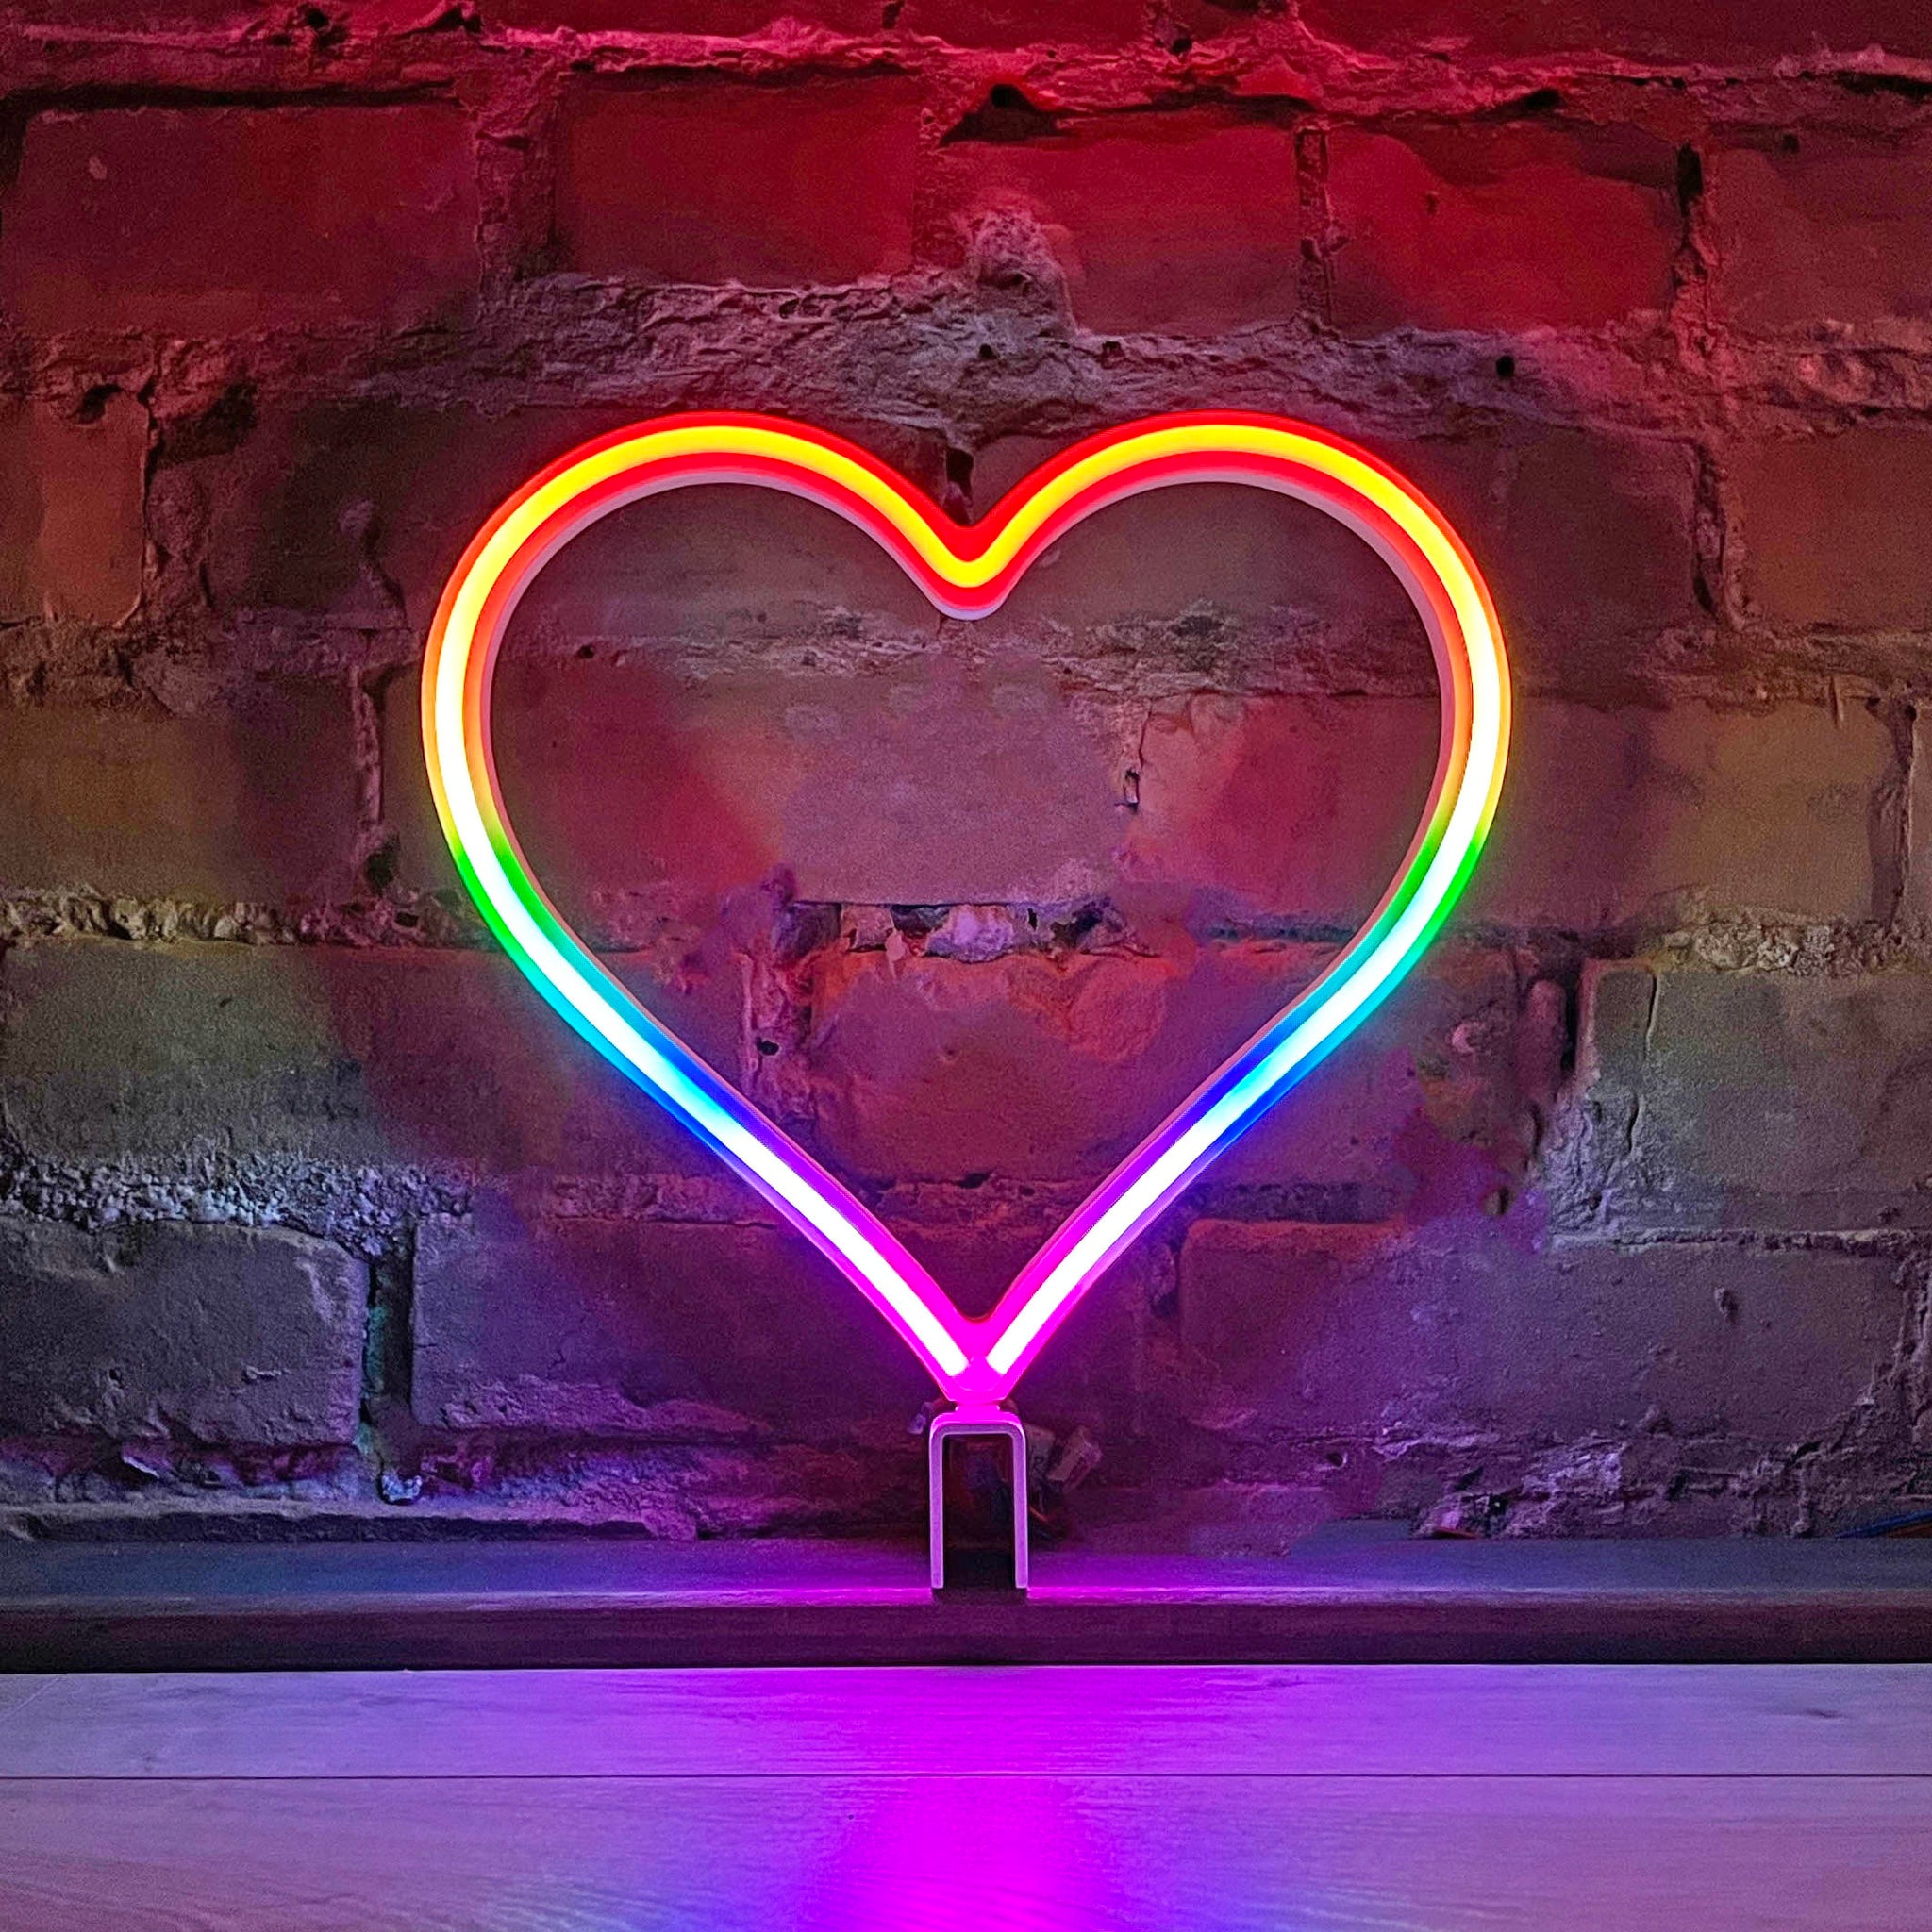 Our Glowing Heart Signature Rainbow Heart – Our Glowing Hearts